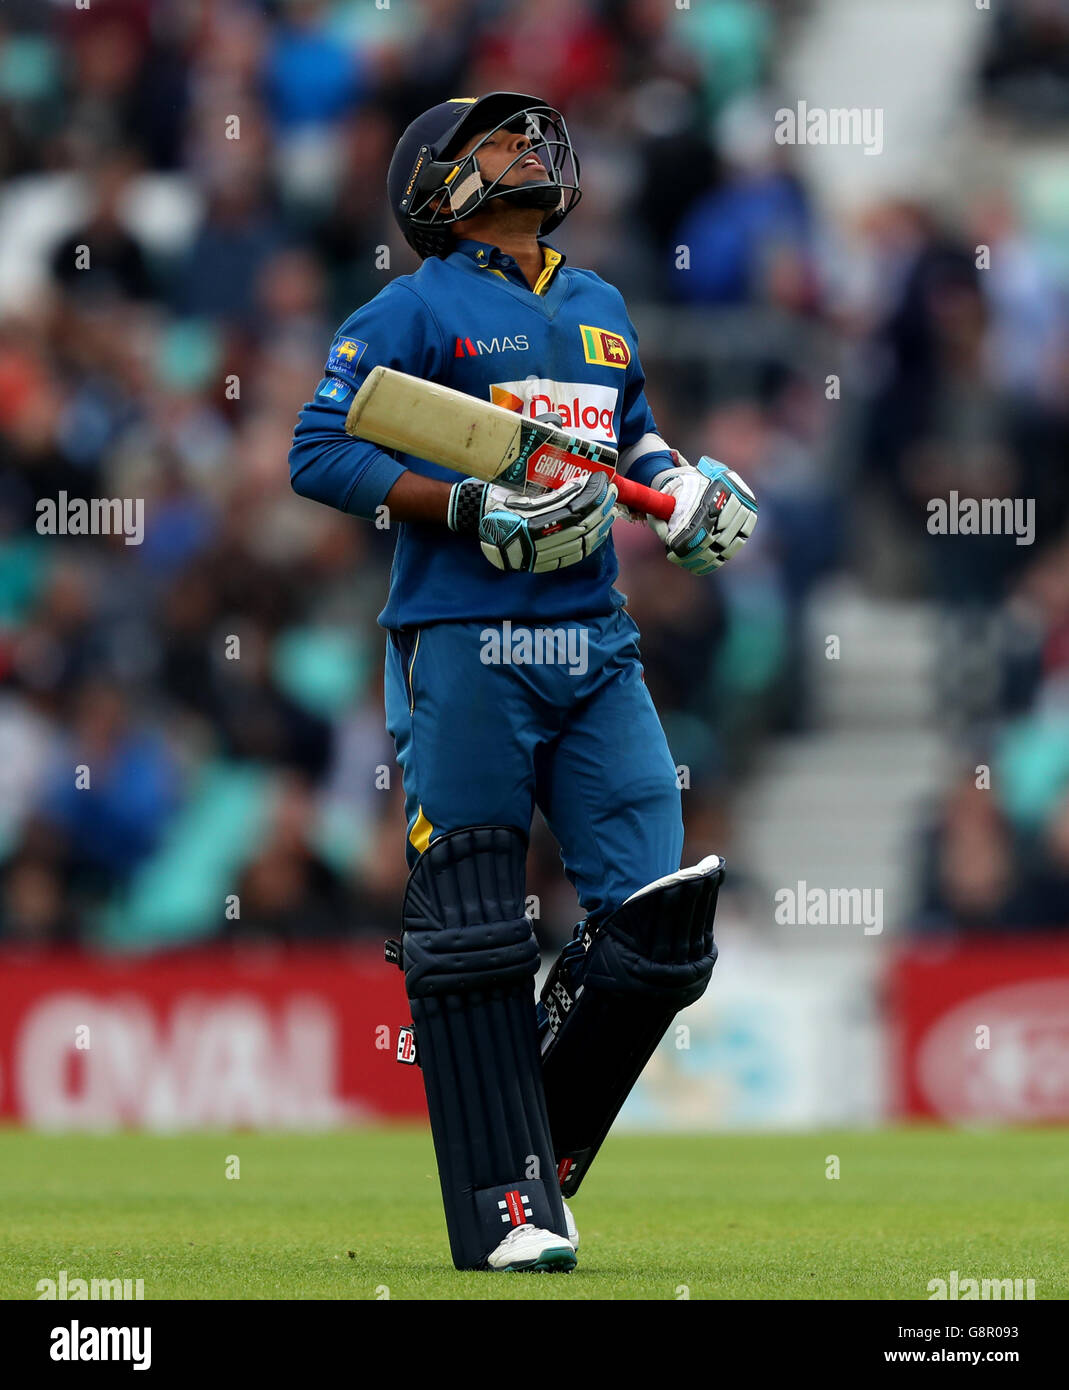 Sri Lanka's Kusal Mendis walks off dejected after being dismissed during the Royal London One Day International Series at the Kia Oval, London. Stock Photo